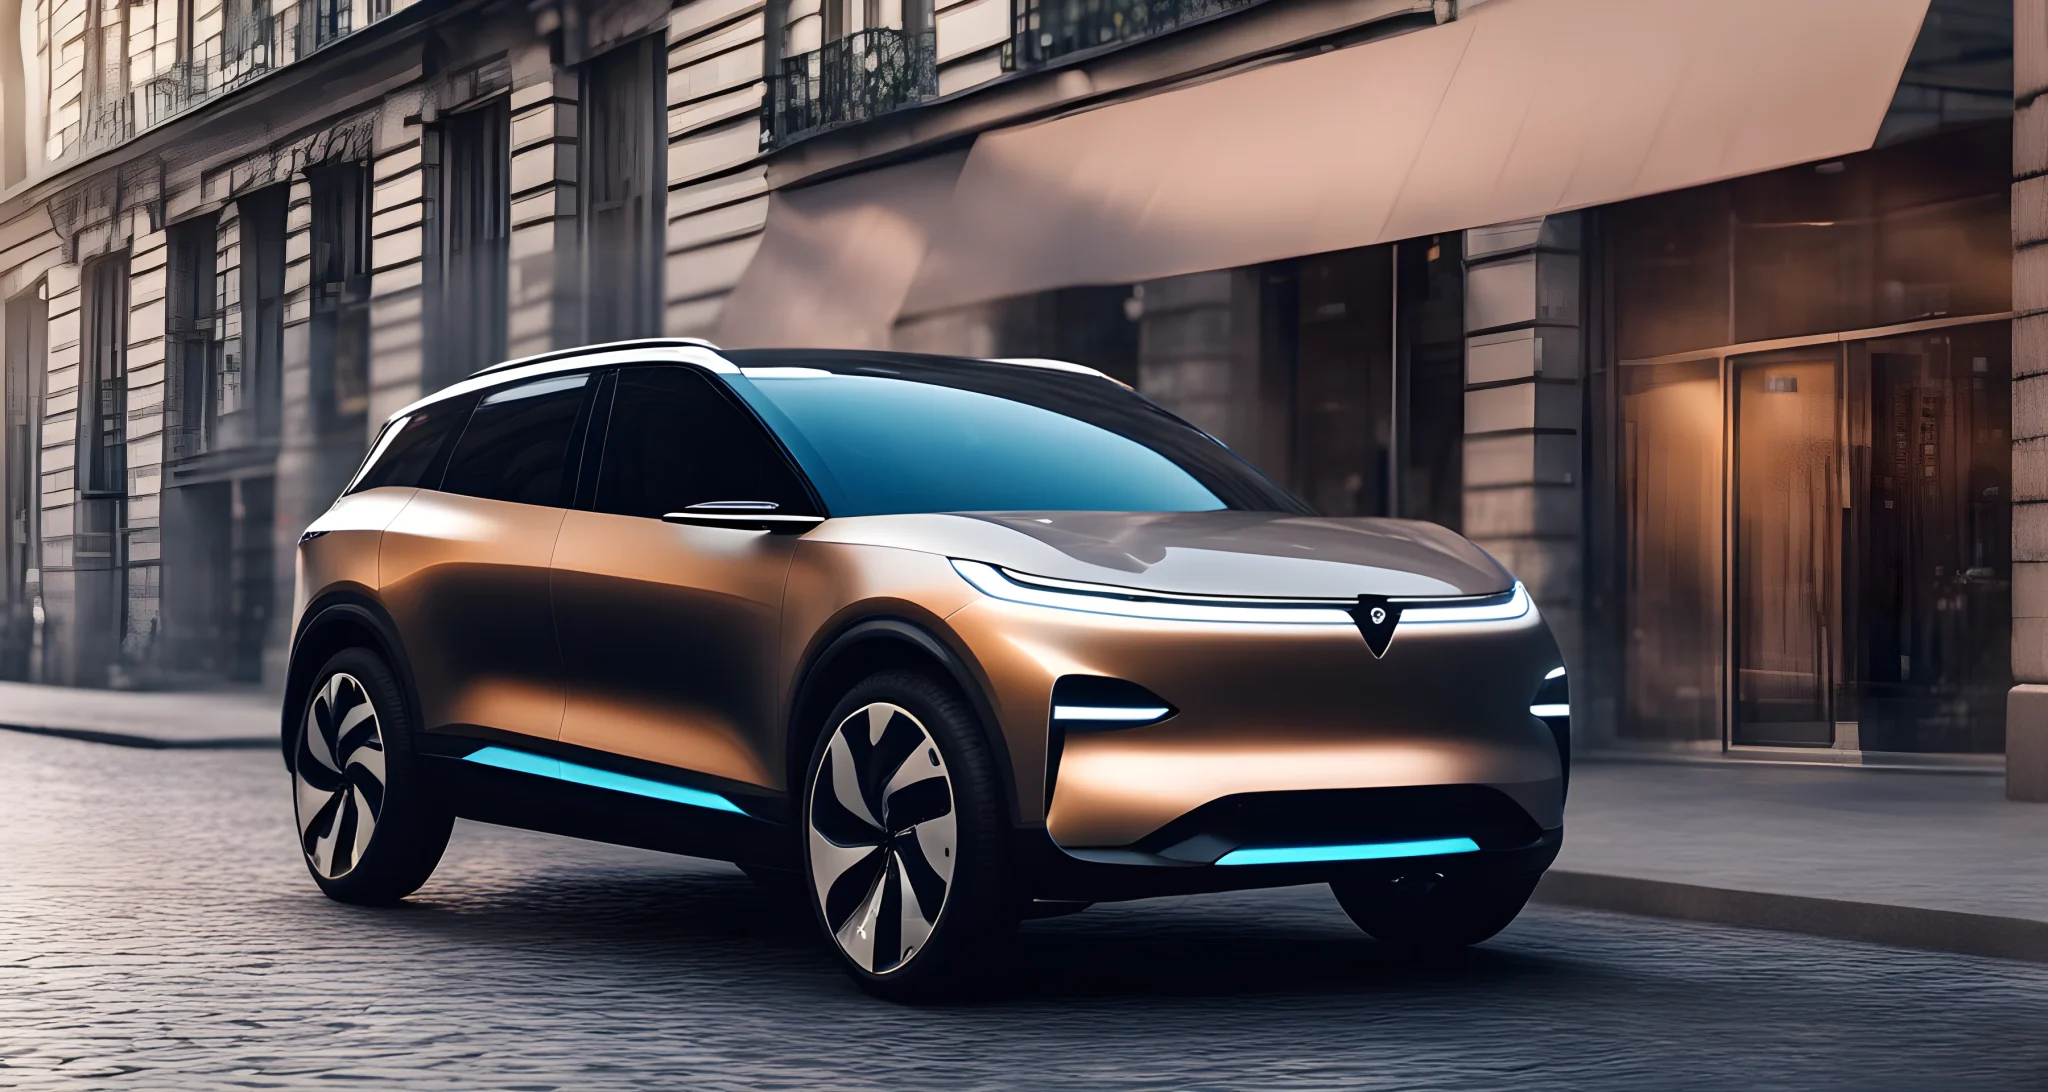 The image shows a sleek and modern electric SUV with a charging port in the front.